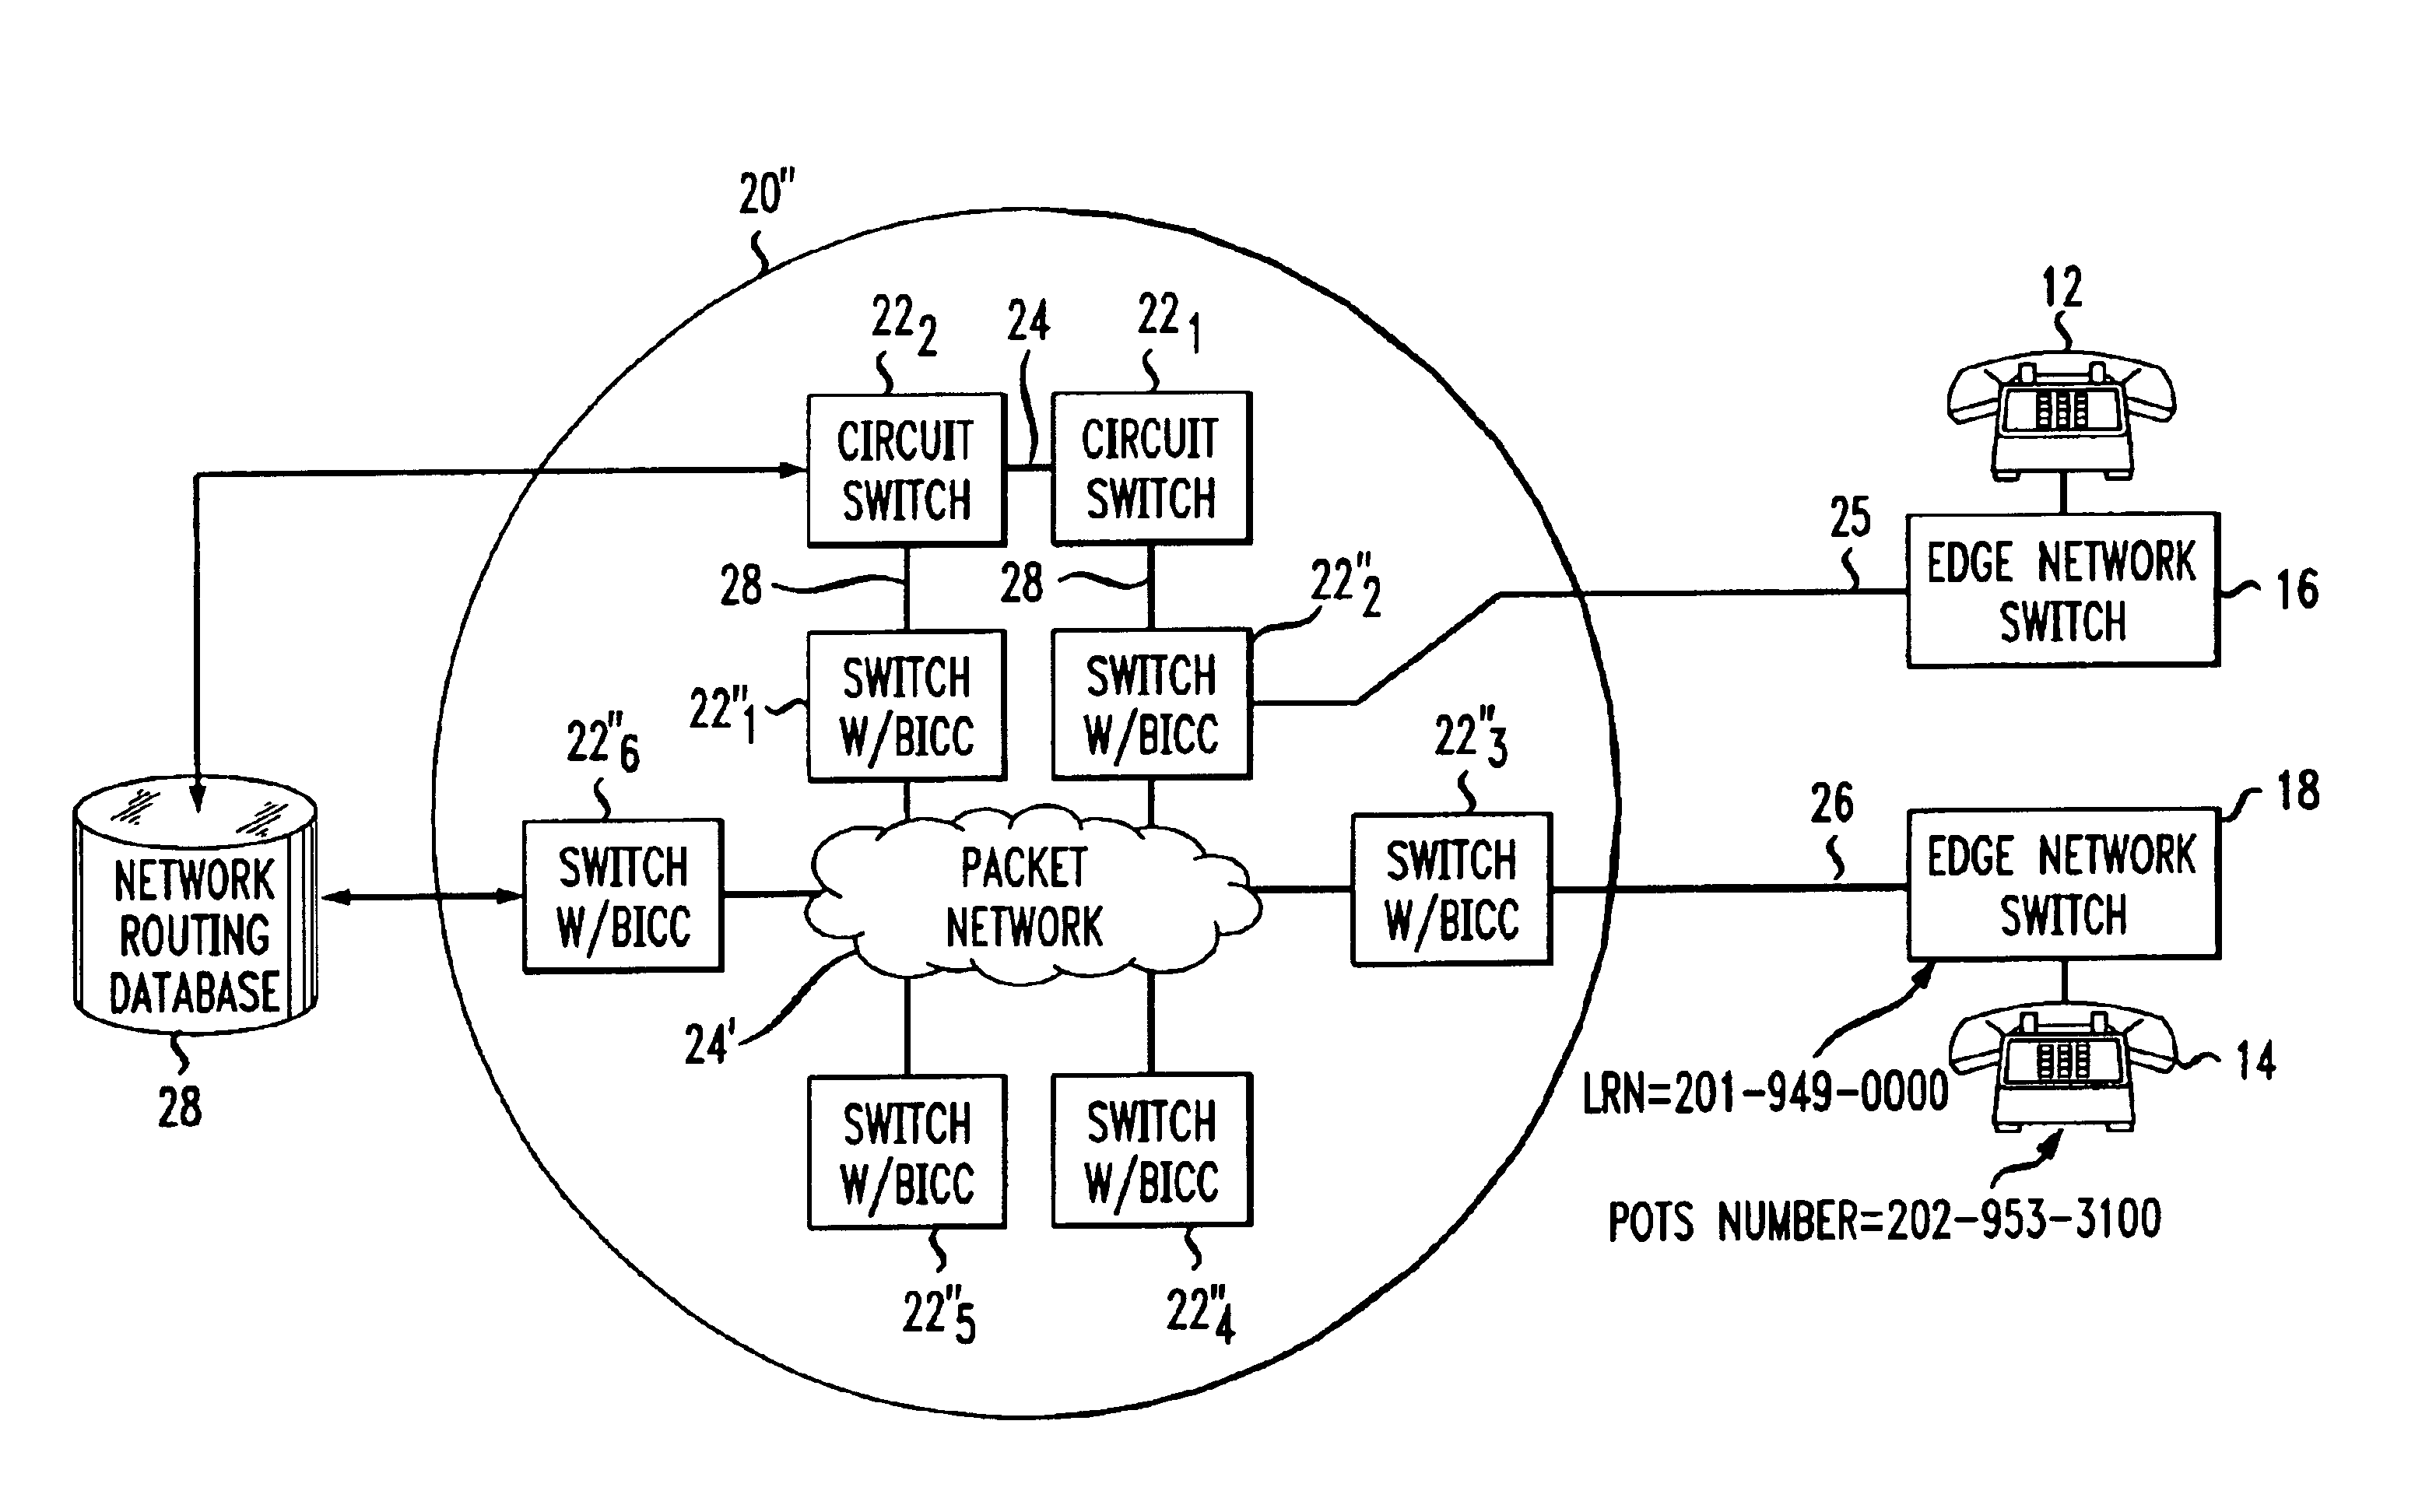 Method and apparatus for providing telecommunications services